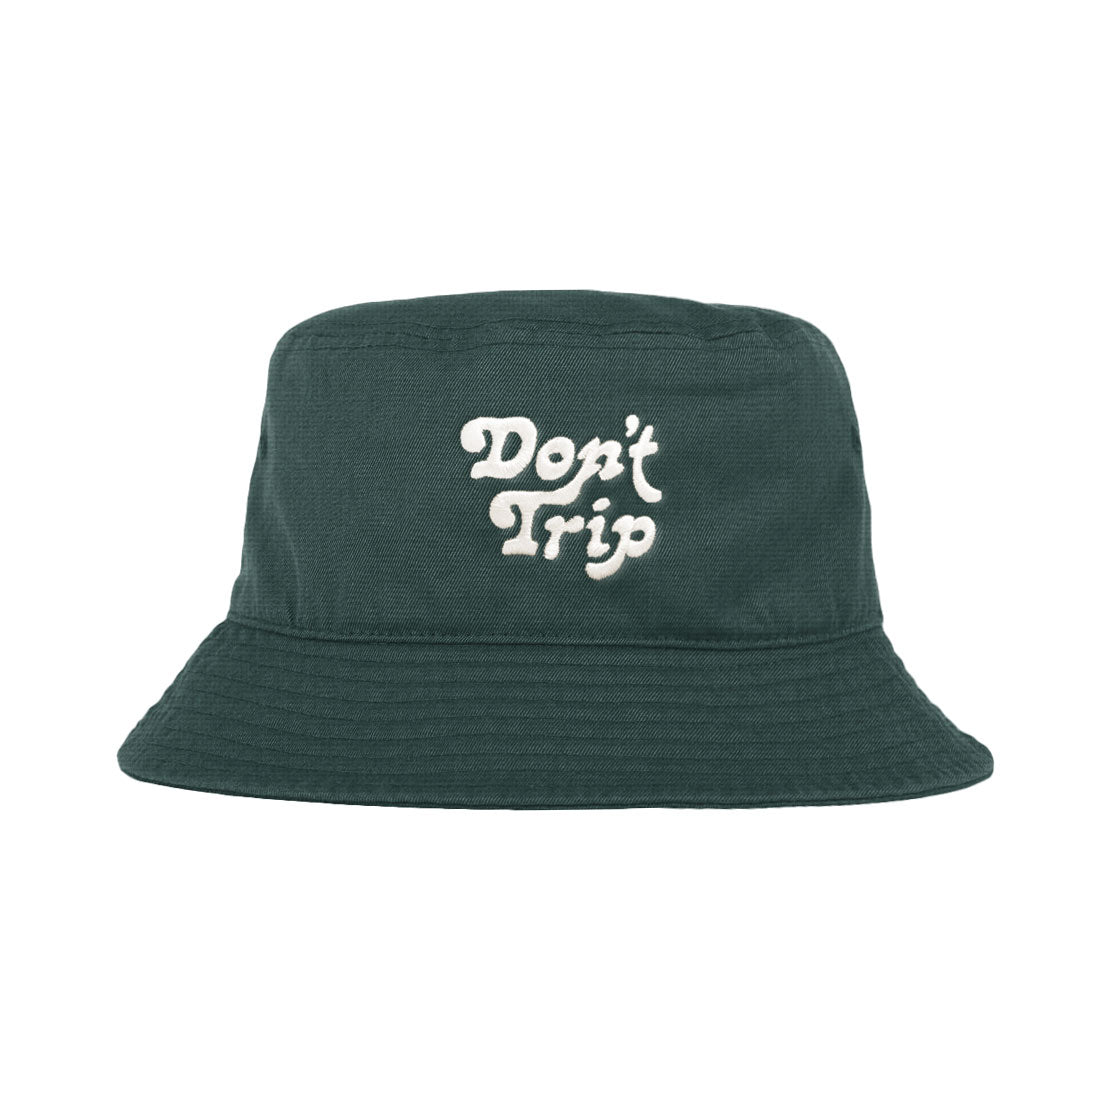 Free & Easy Don't Trip Canvas Bucket Hat in dark green with white Don't Trip embroidery on a white background - Free & Easy